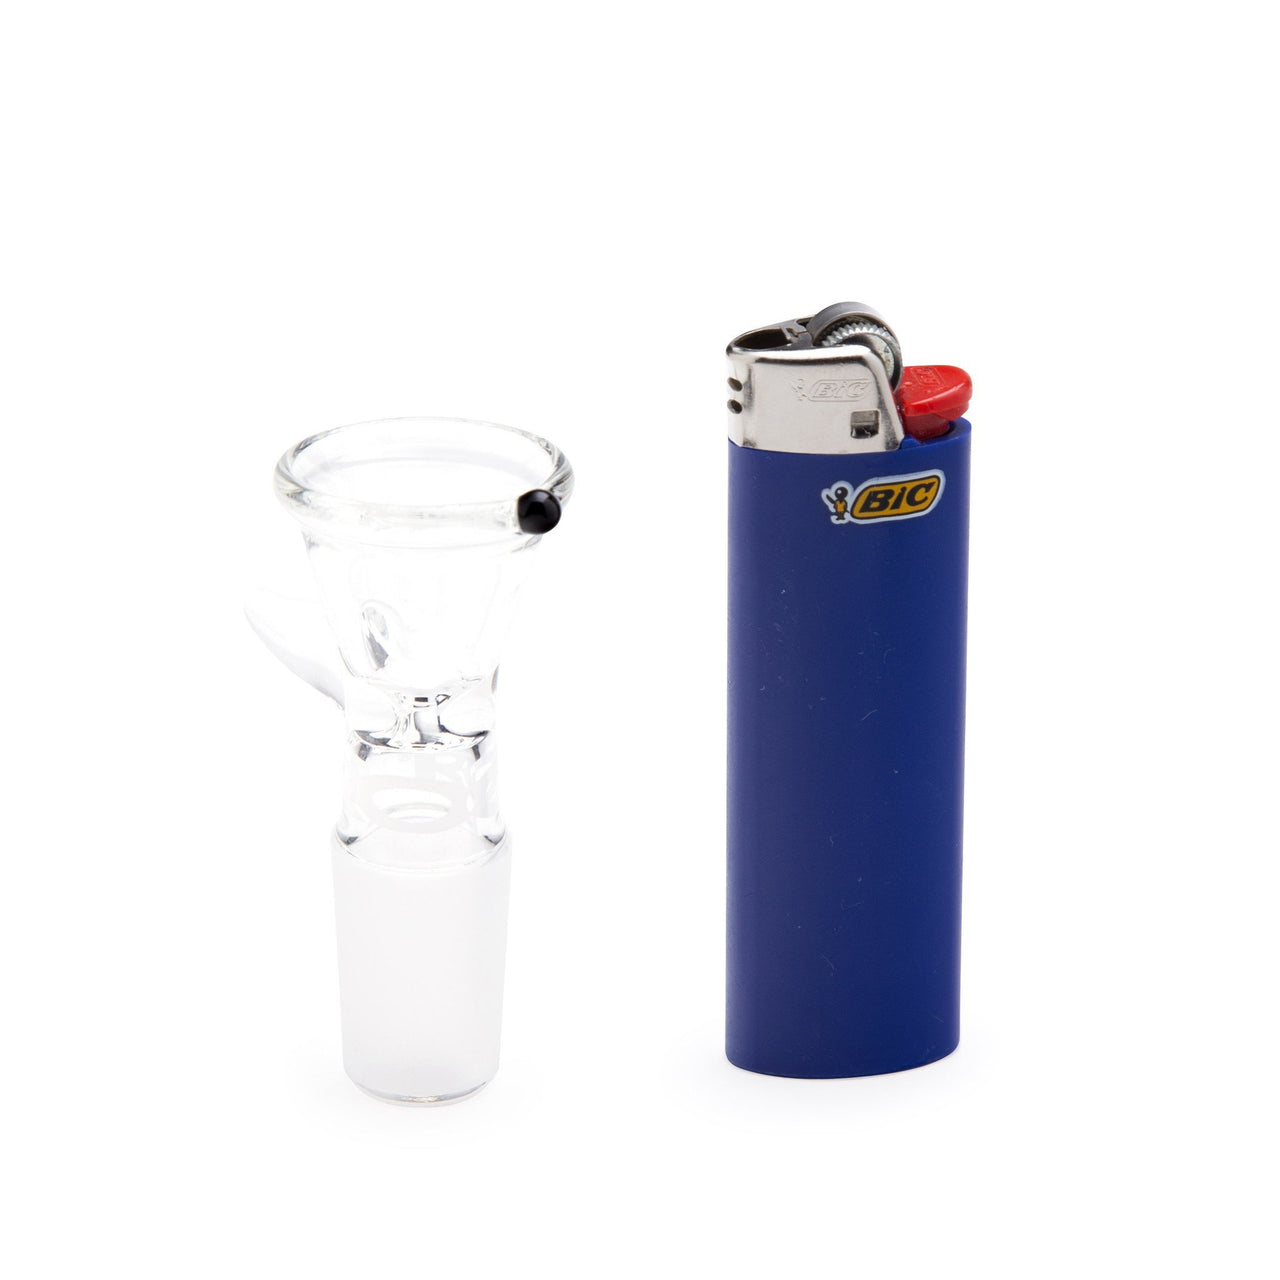 ROOR 18.8mm Funnel Bowl w/handle - 420 Science - The most trusted online smoke shop.